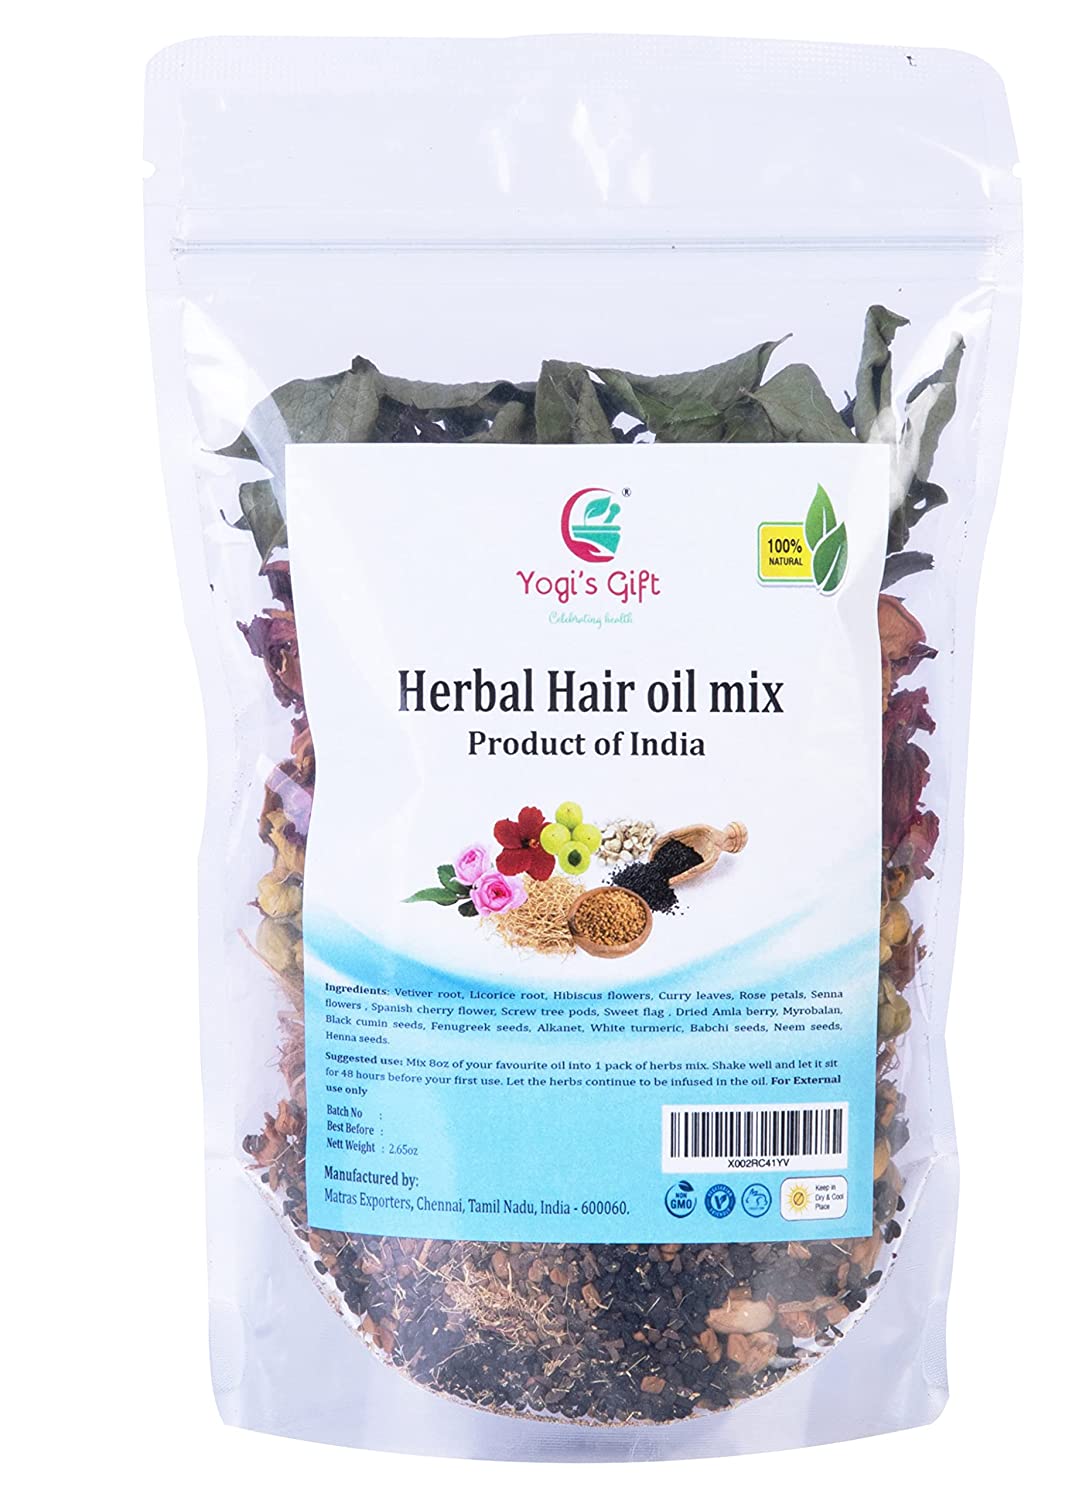 Yogi’s Gift | Organic Ayurvedic Herbal Hair oil mix | 18 Essential raw herbs for oil infusion | 100% natural Indian herbs